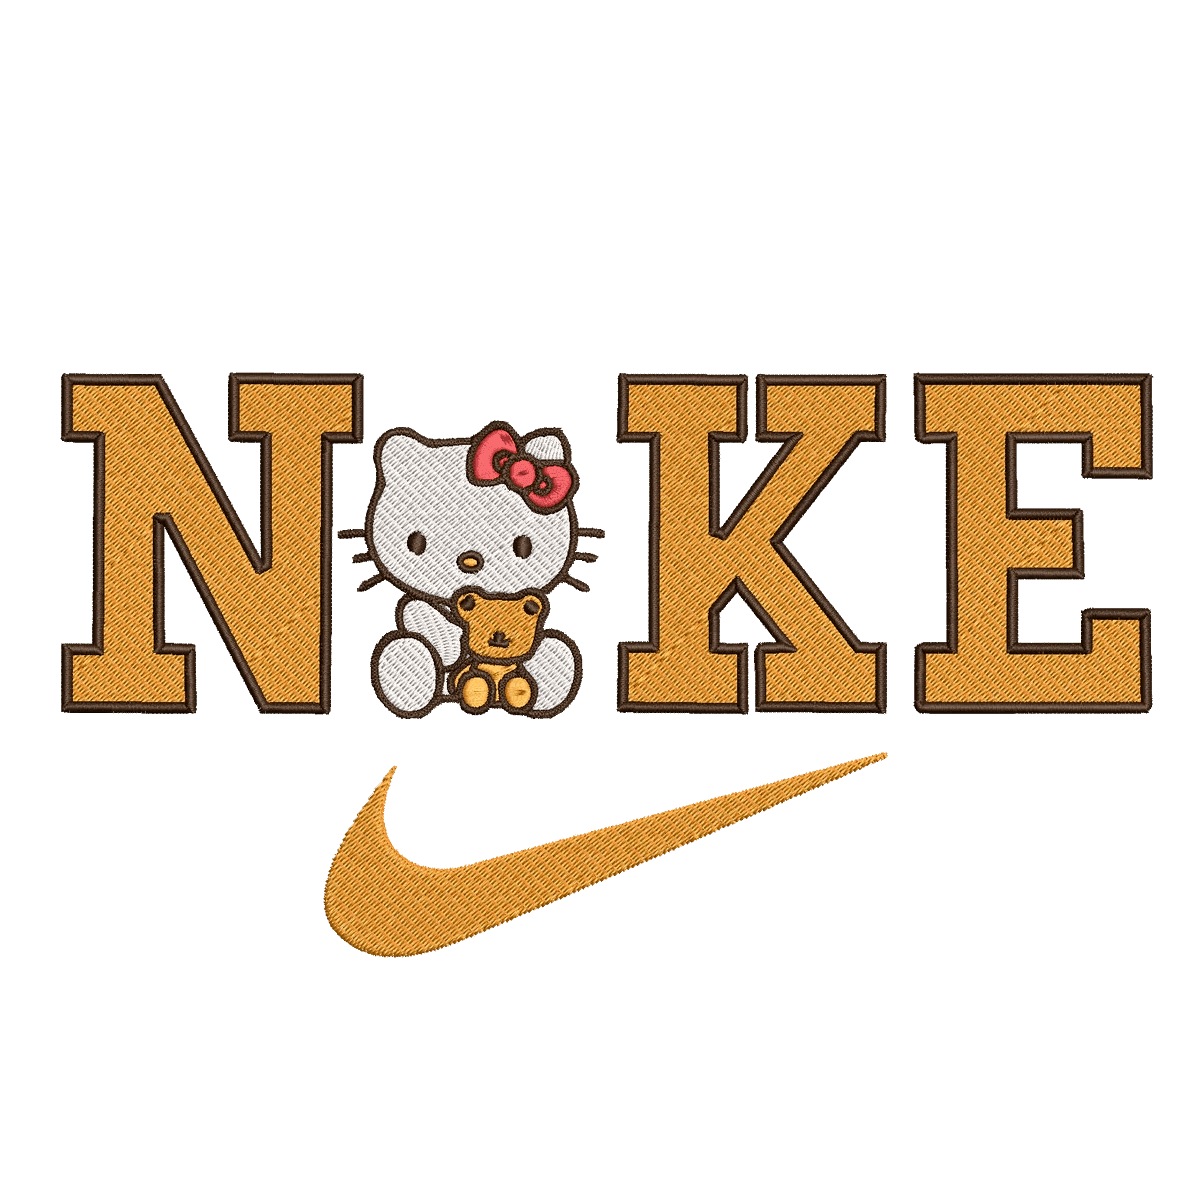 Nike and Hello Kitty 6 - Embroidery Design - FineryEmbroidery